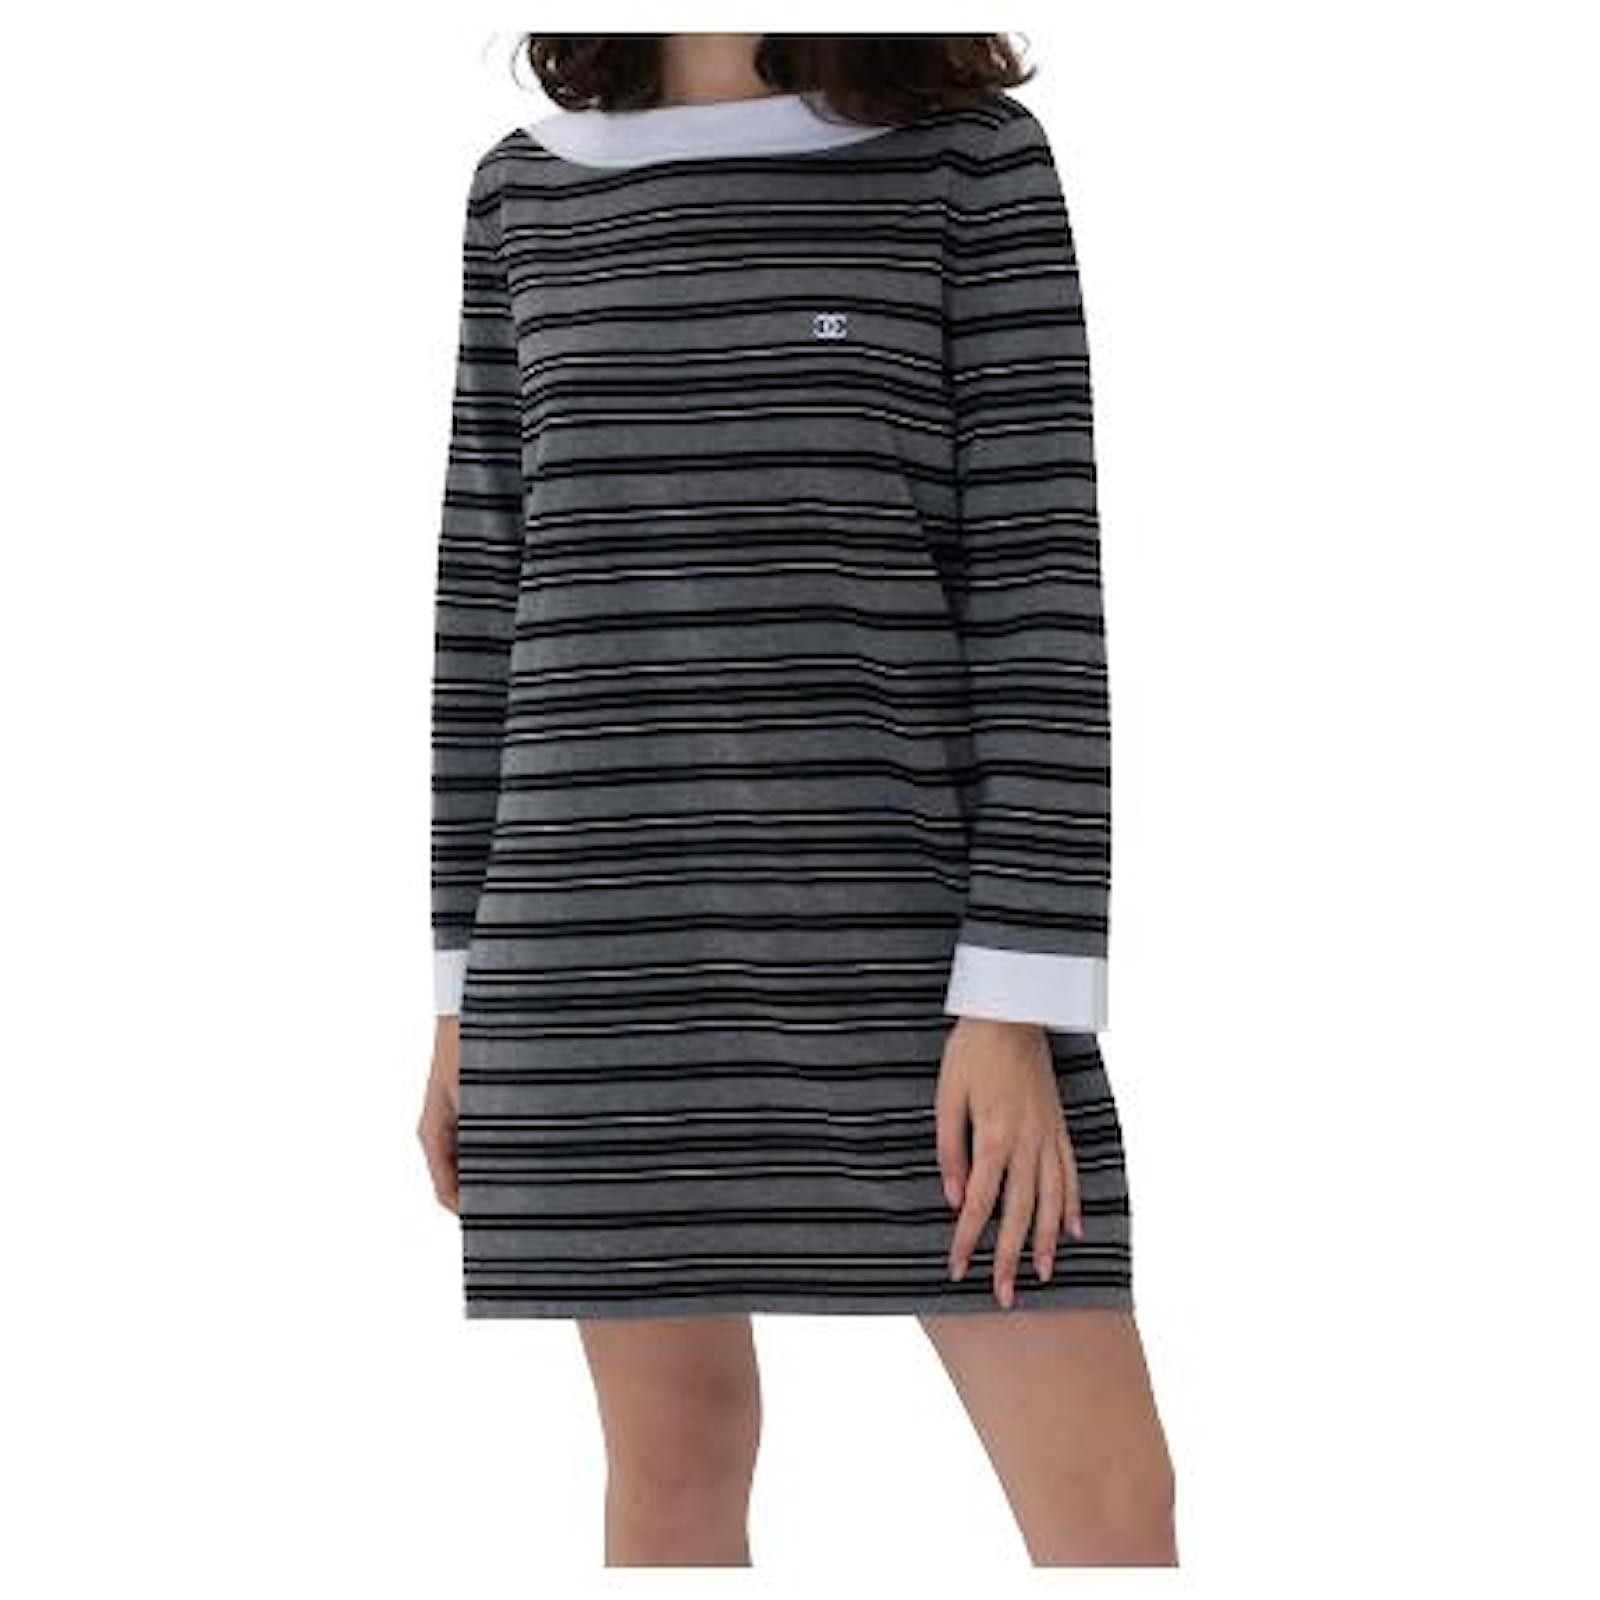 Chanel by Karl Lagerfeld Bicolor CC Cotton Dress